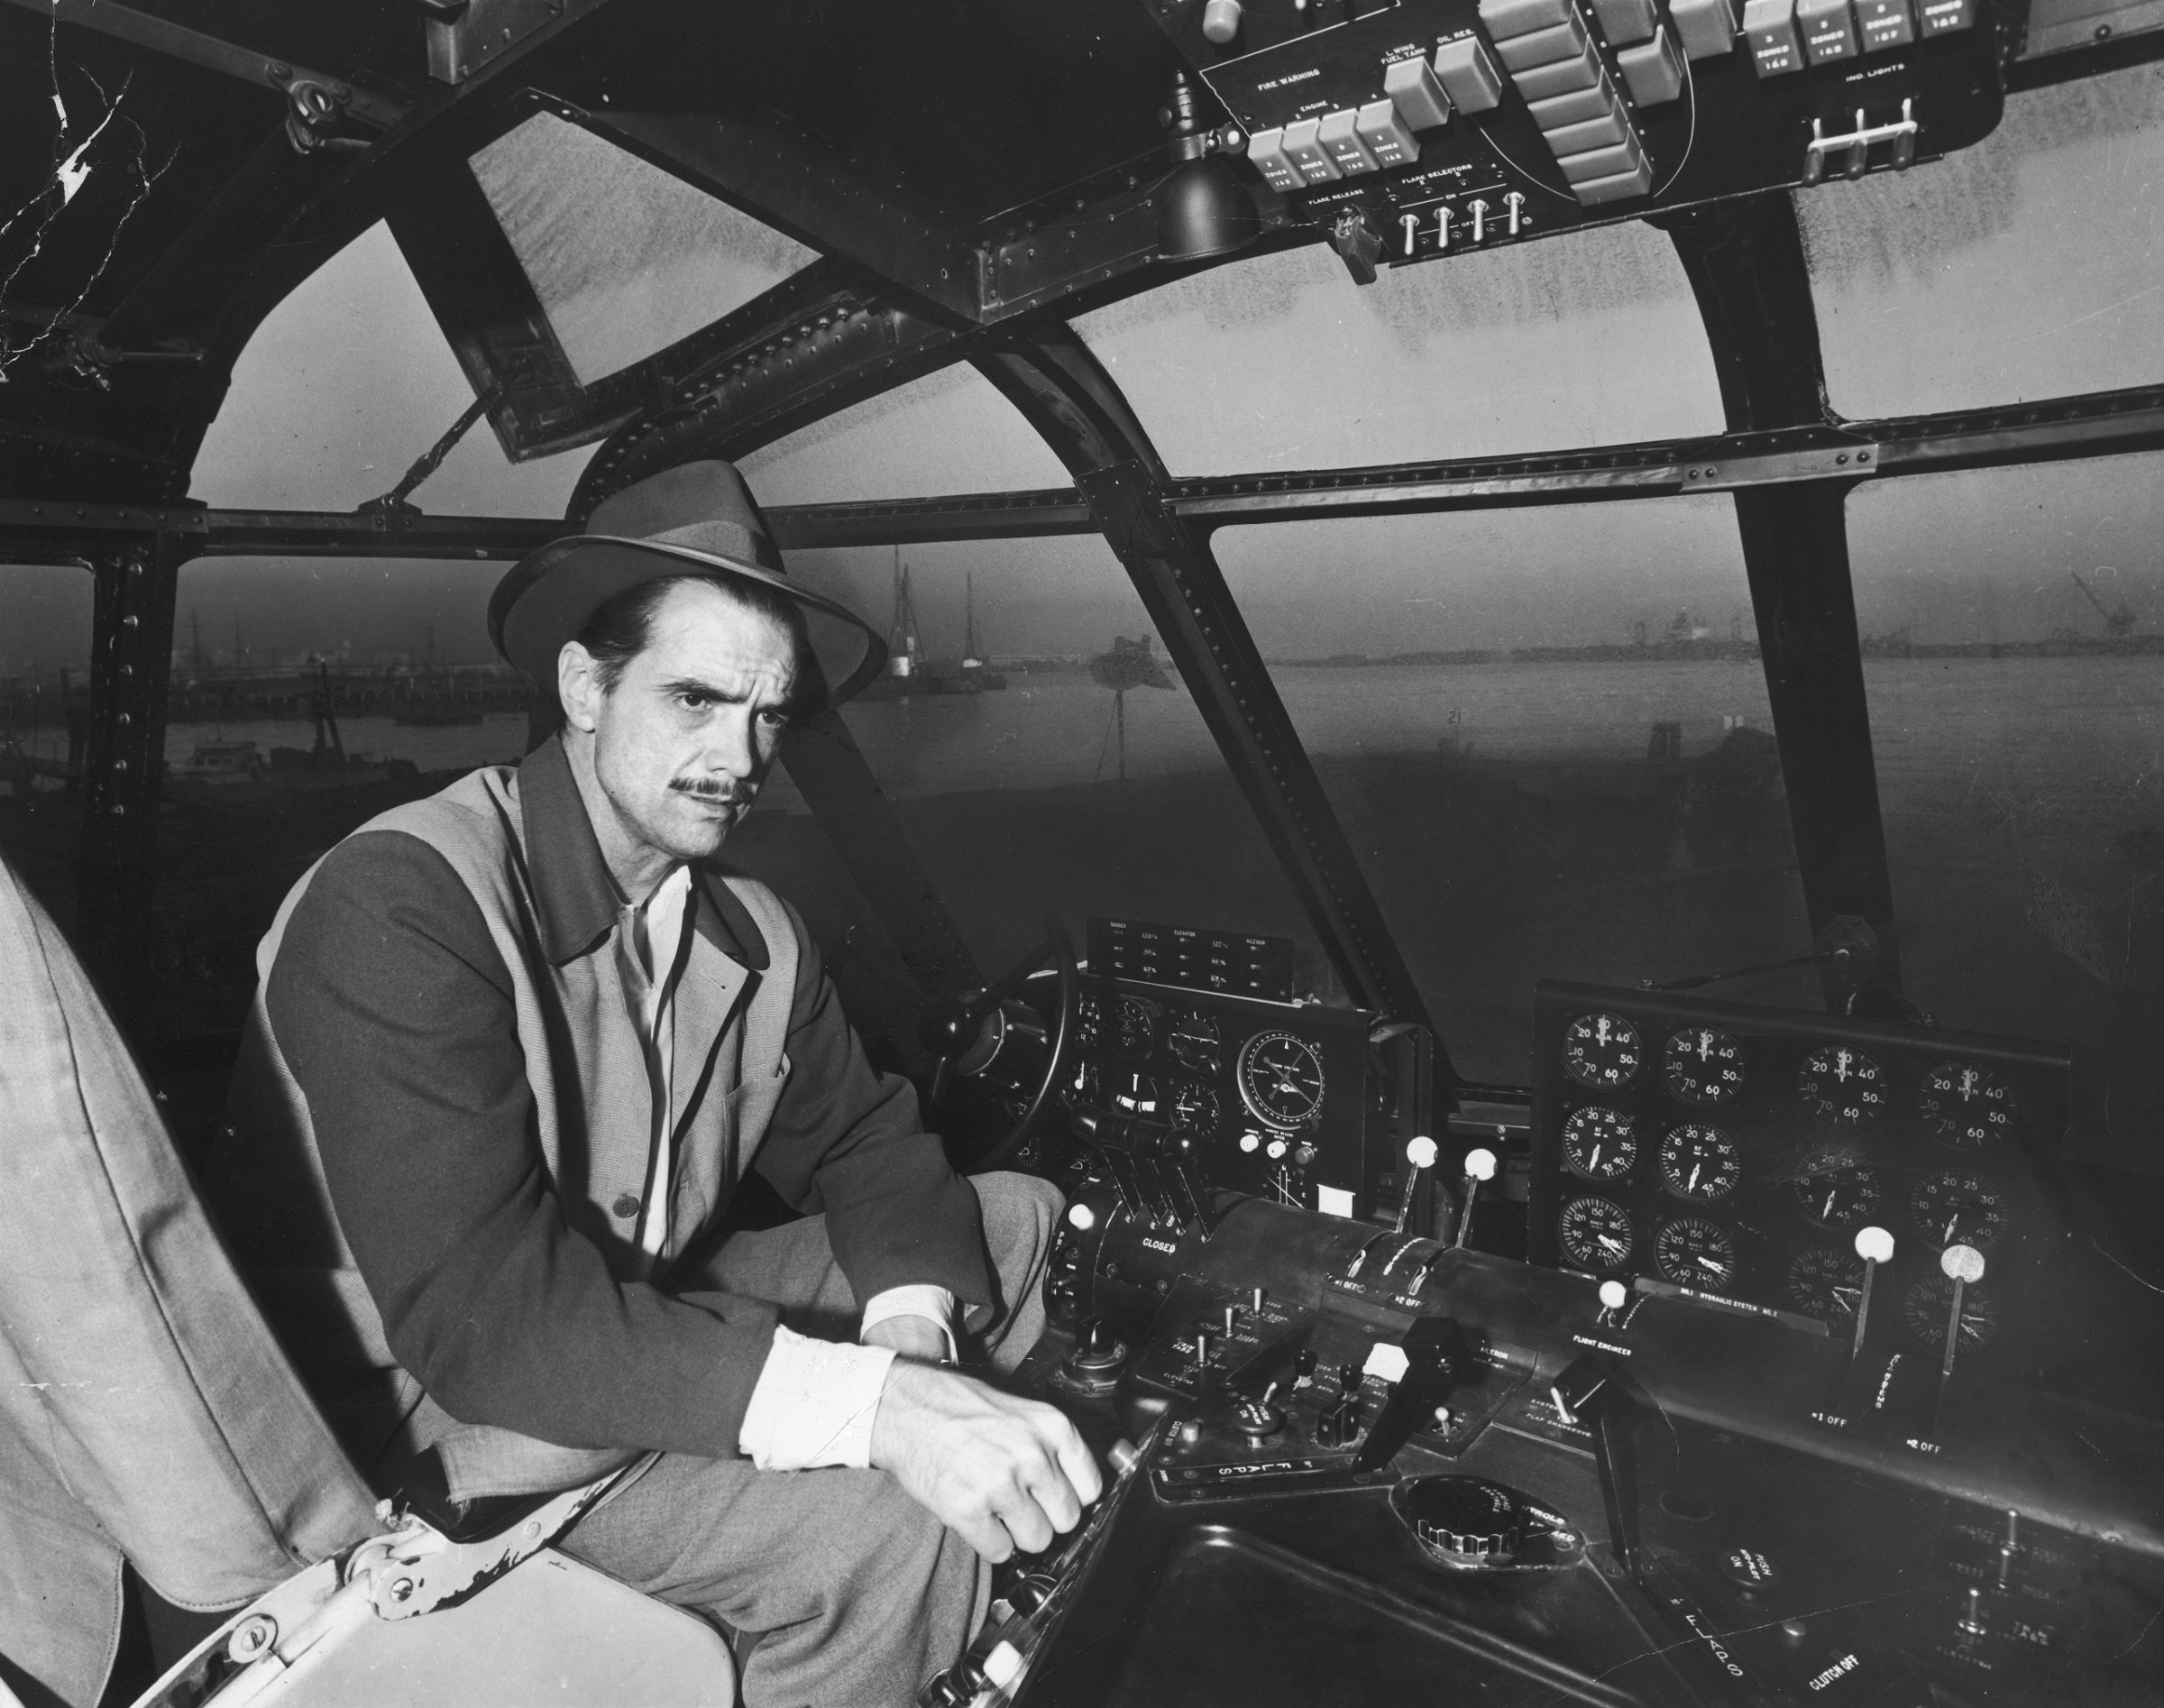 Howard Hughes' at the controls of his H-4 Hercules troop transport plane, the "Spruce Goose," November 1947.